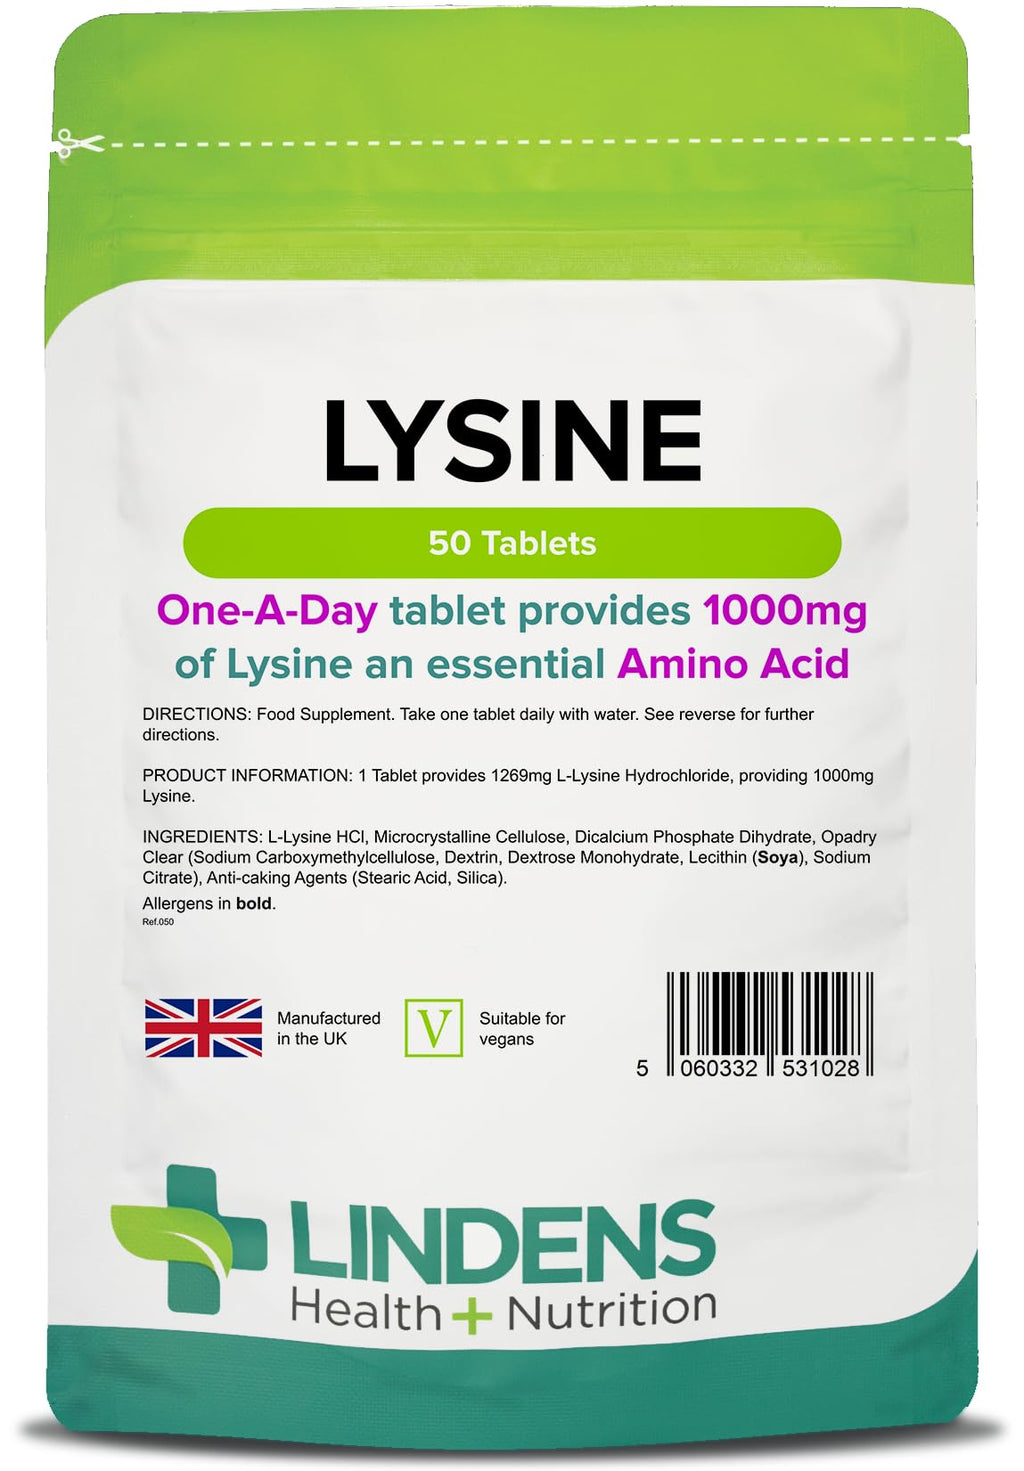 [Australia] - Lindens Lysine 1000mg Tablets - 50 Pack - Each Tablet Yields 1000mg Free-Form Lysine in A Convenient One-a-Day Tablet - UK Manufacturer, Letterbox Friendly 